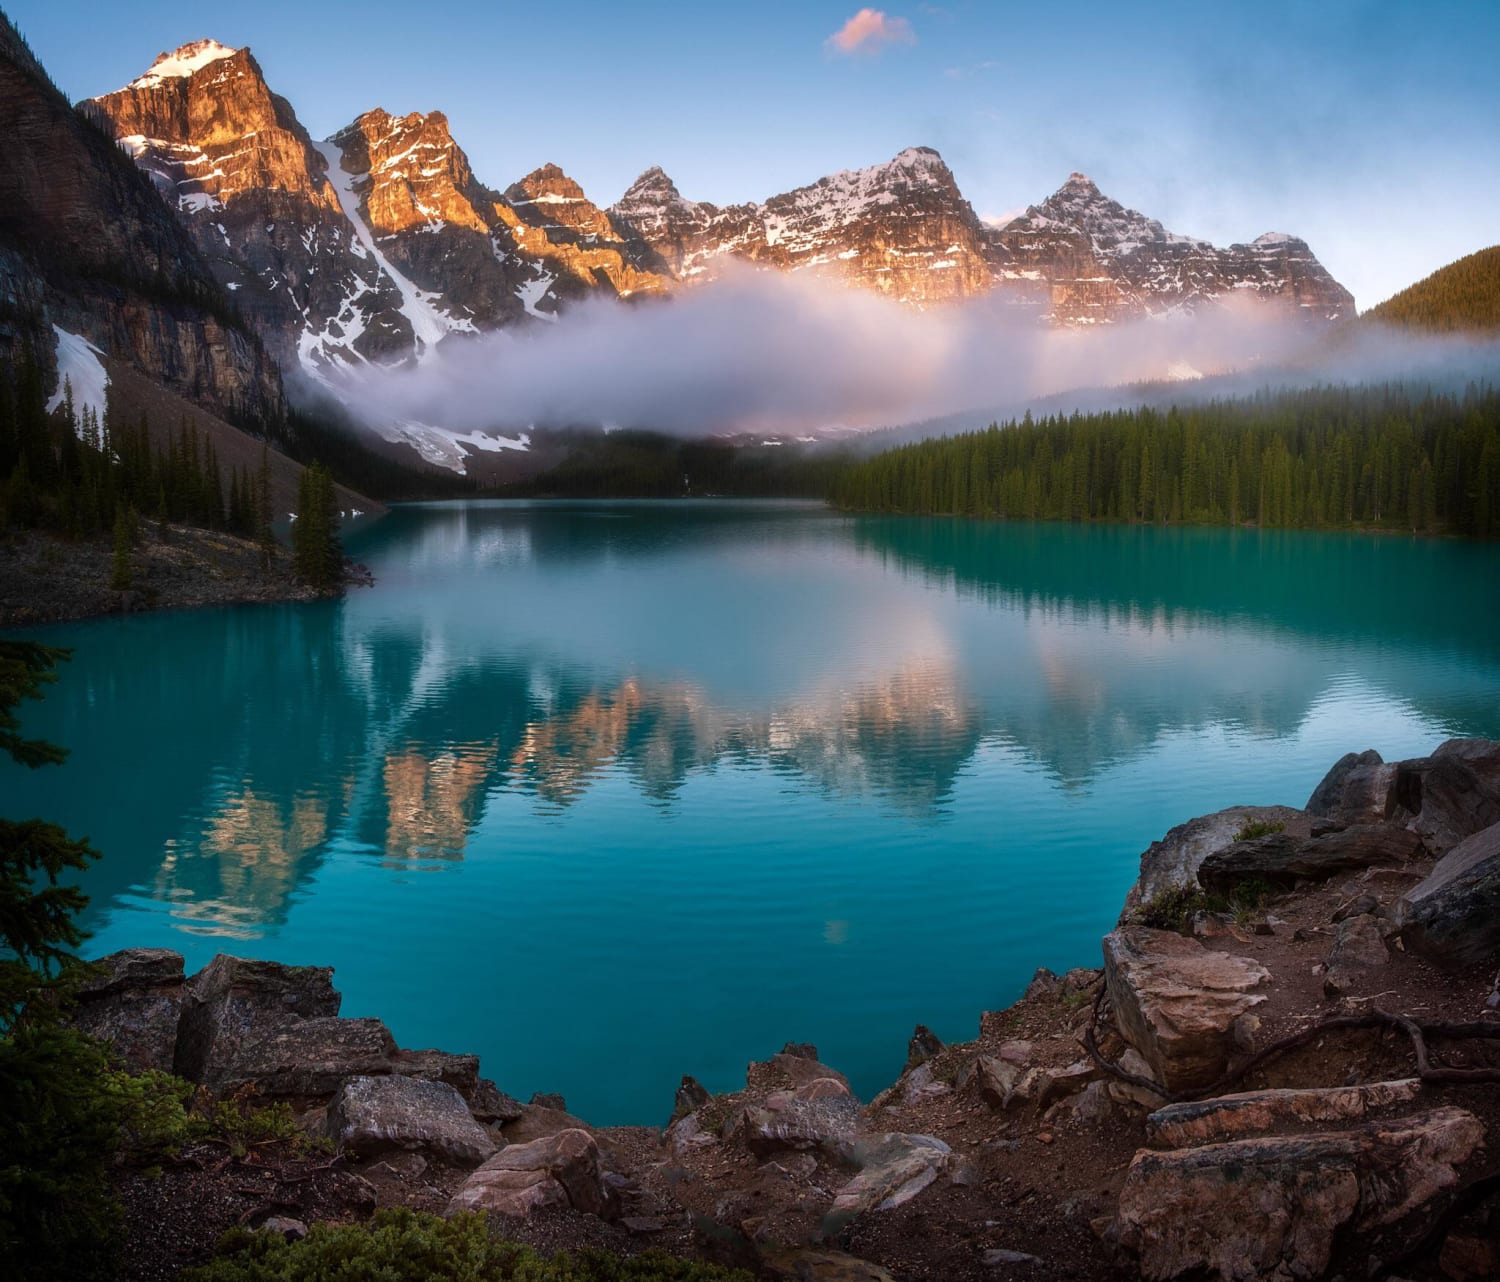 Your daily dose of Reddit lake. Look at it, It’s beautiful! Banff, Canada of course.